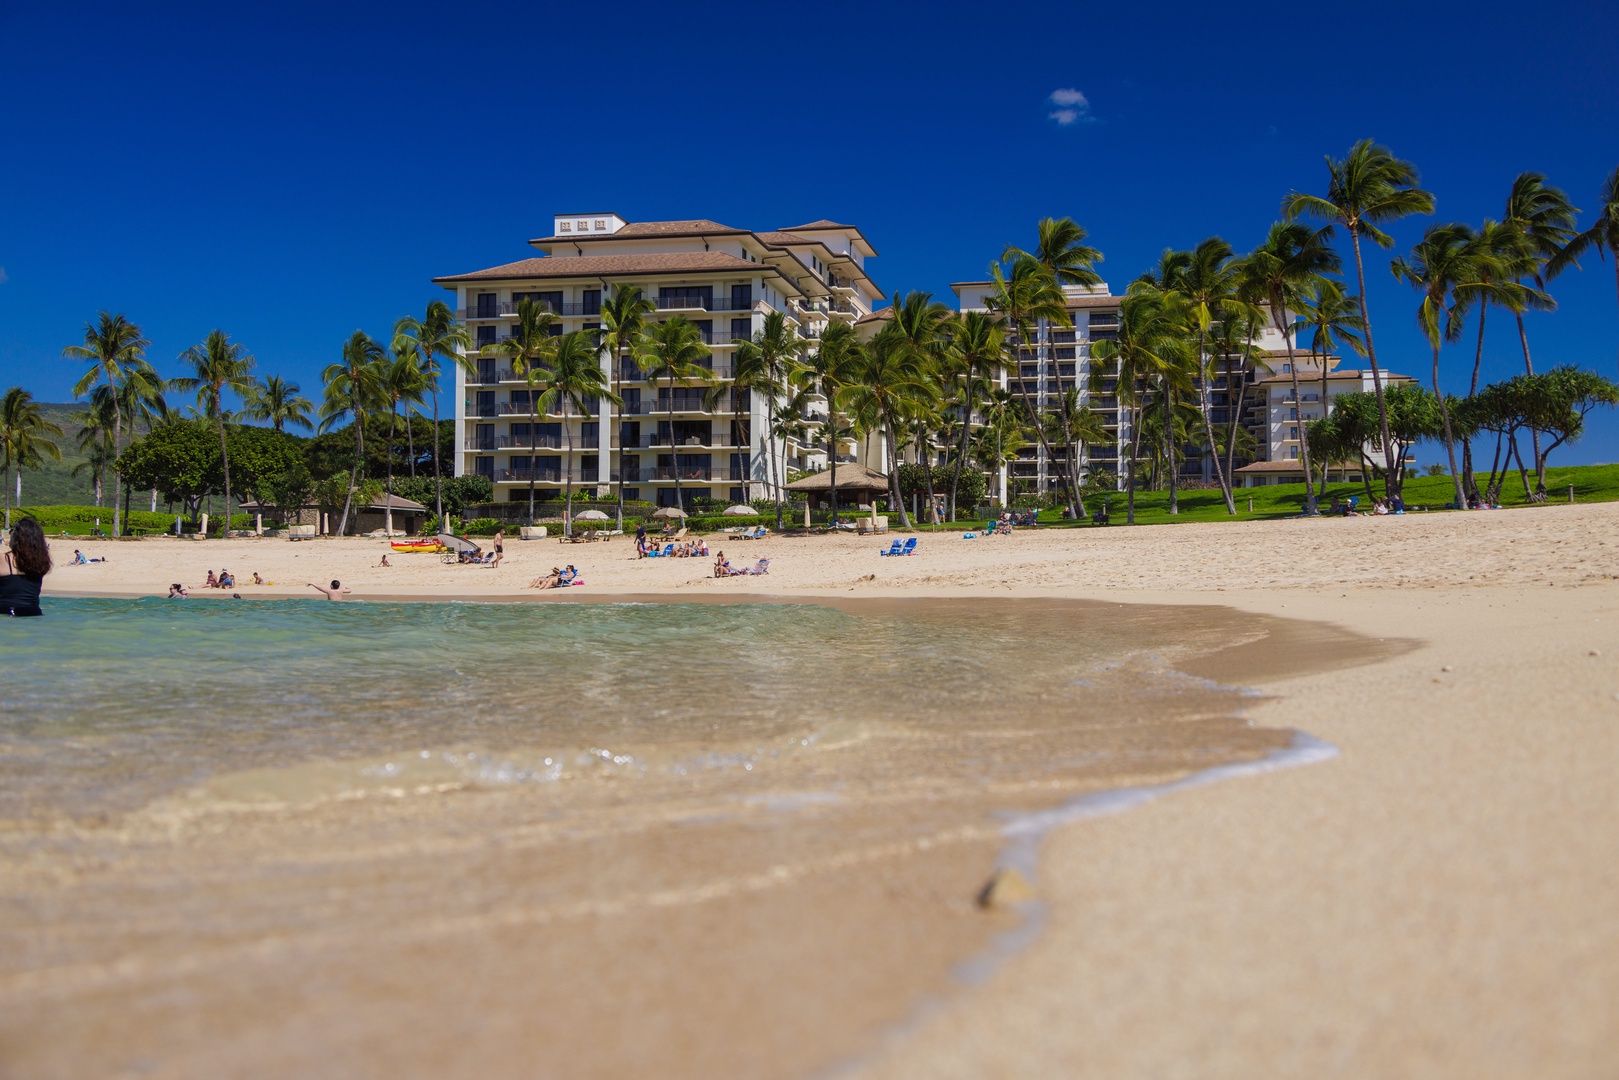 Kapolei Vacation Rentals, Ko Olina Kai 1105F - The private lagoon at Ko Olina is the perfect place for a relaxing afternoon in the sun.